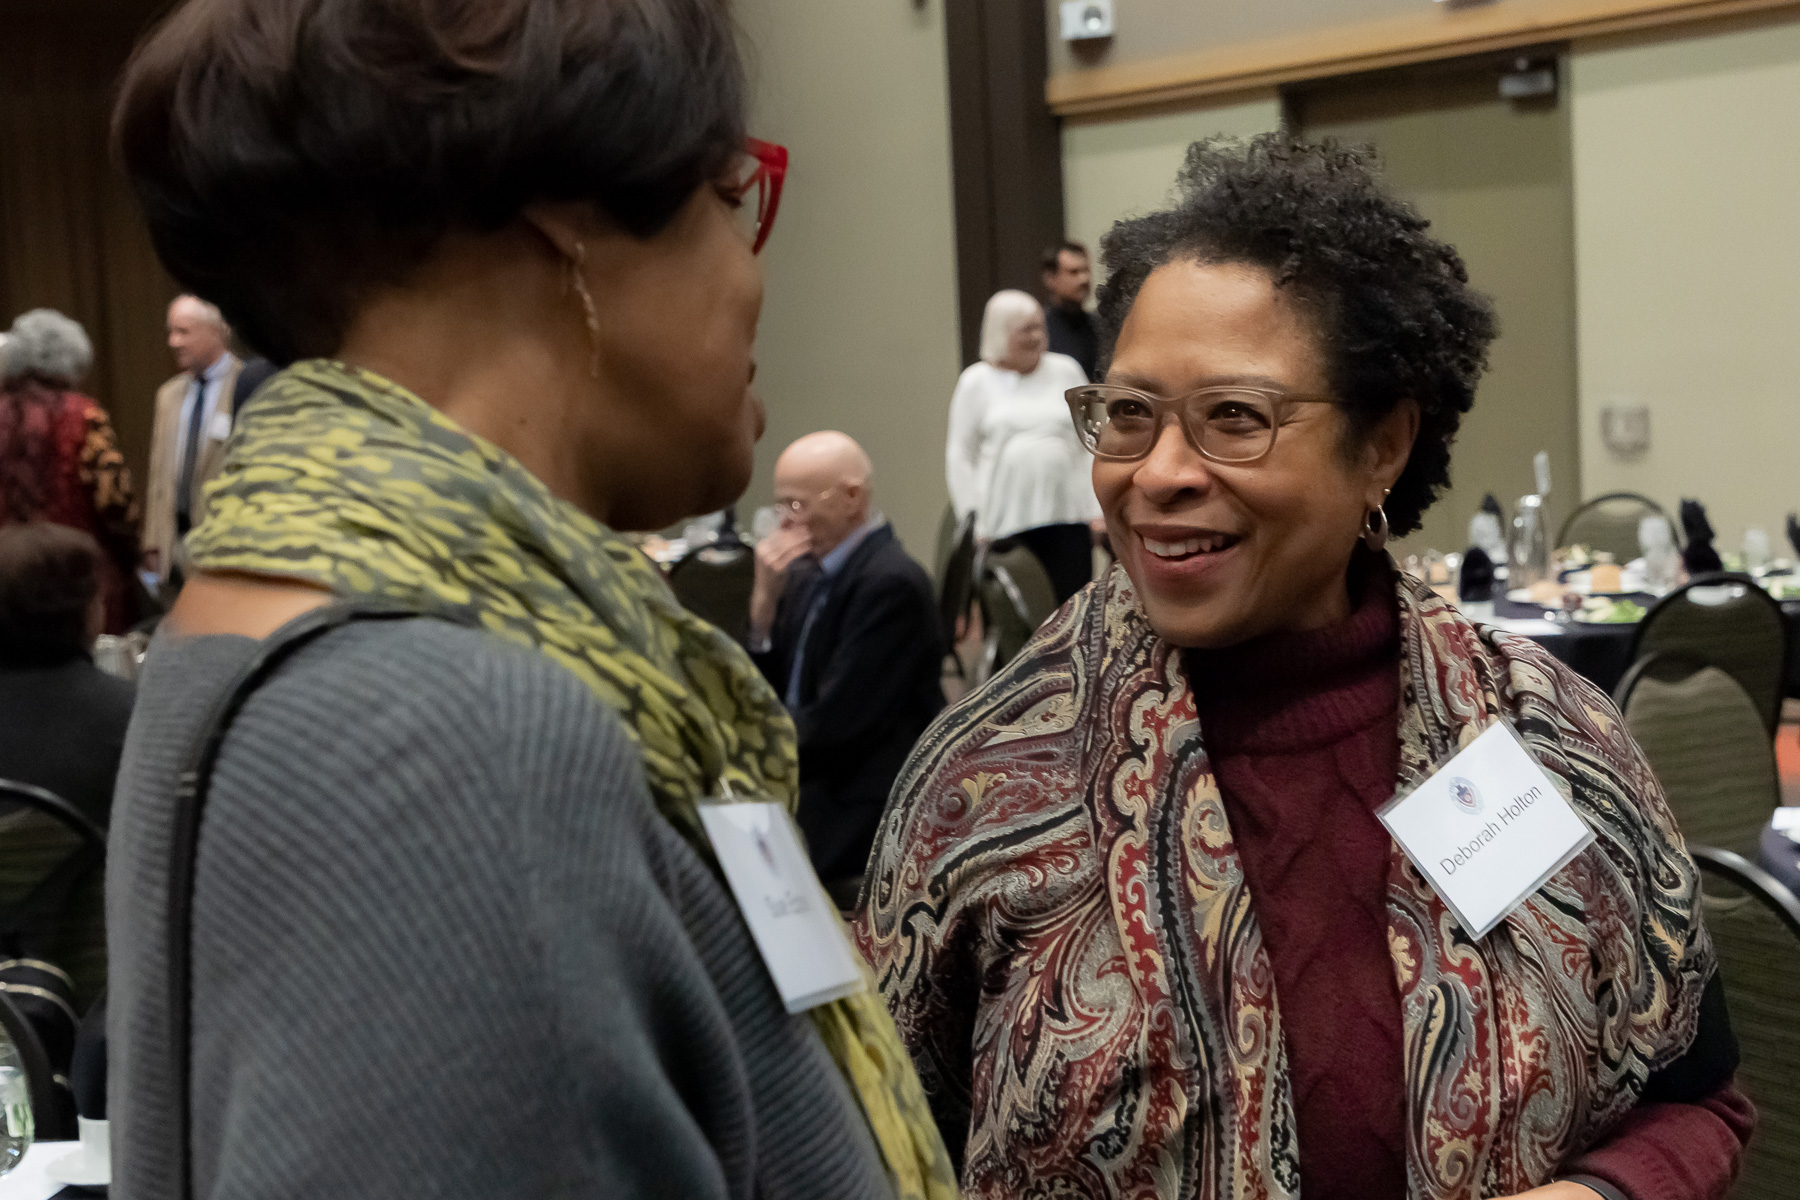 Deborah Holton, School for New Learning, right, talks with fellow honorees as DePaul University faculty and staff members are honored for their 25 years of service during a luncheon, Tuesday, Nov. 13, 2018, at the Lincoln Park Student Center. The honorees were recognized by A. Gabriel Esteban, Ph.D., president of DePaul, and will have their names added to plaques located on the Loop and Lincoln Park Campuses. (DePaul University/Jeff Carrion)